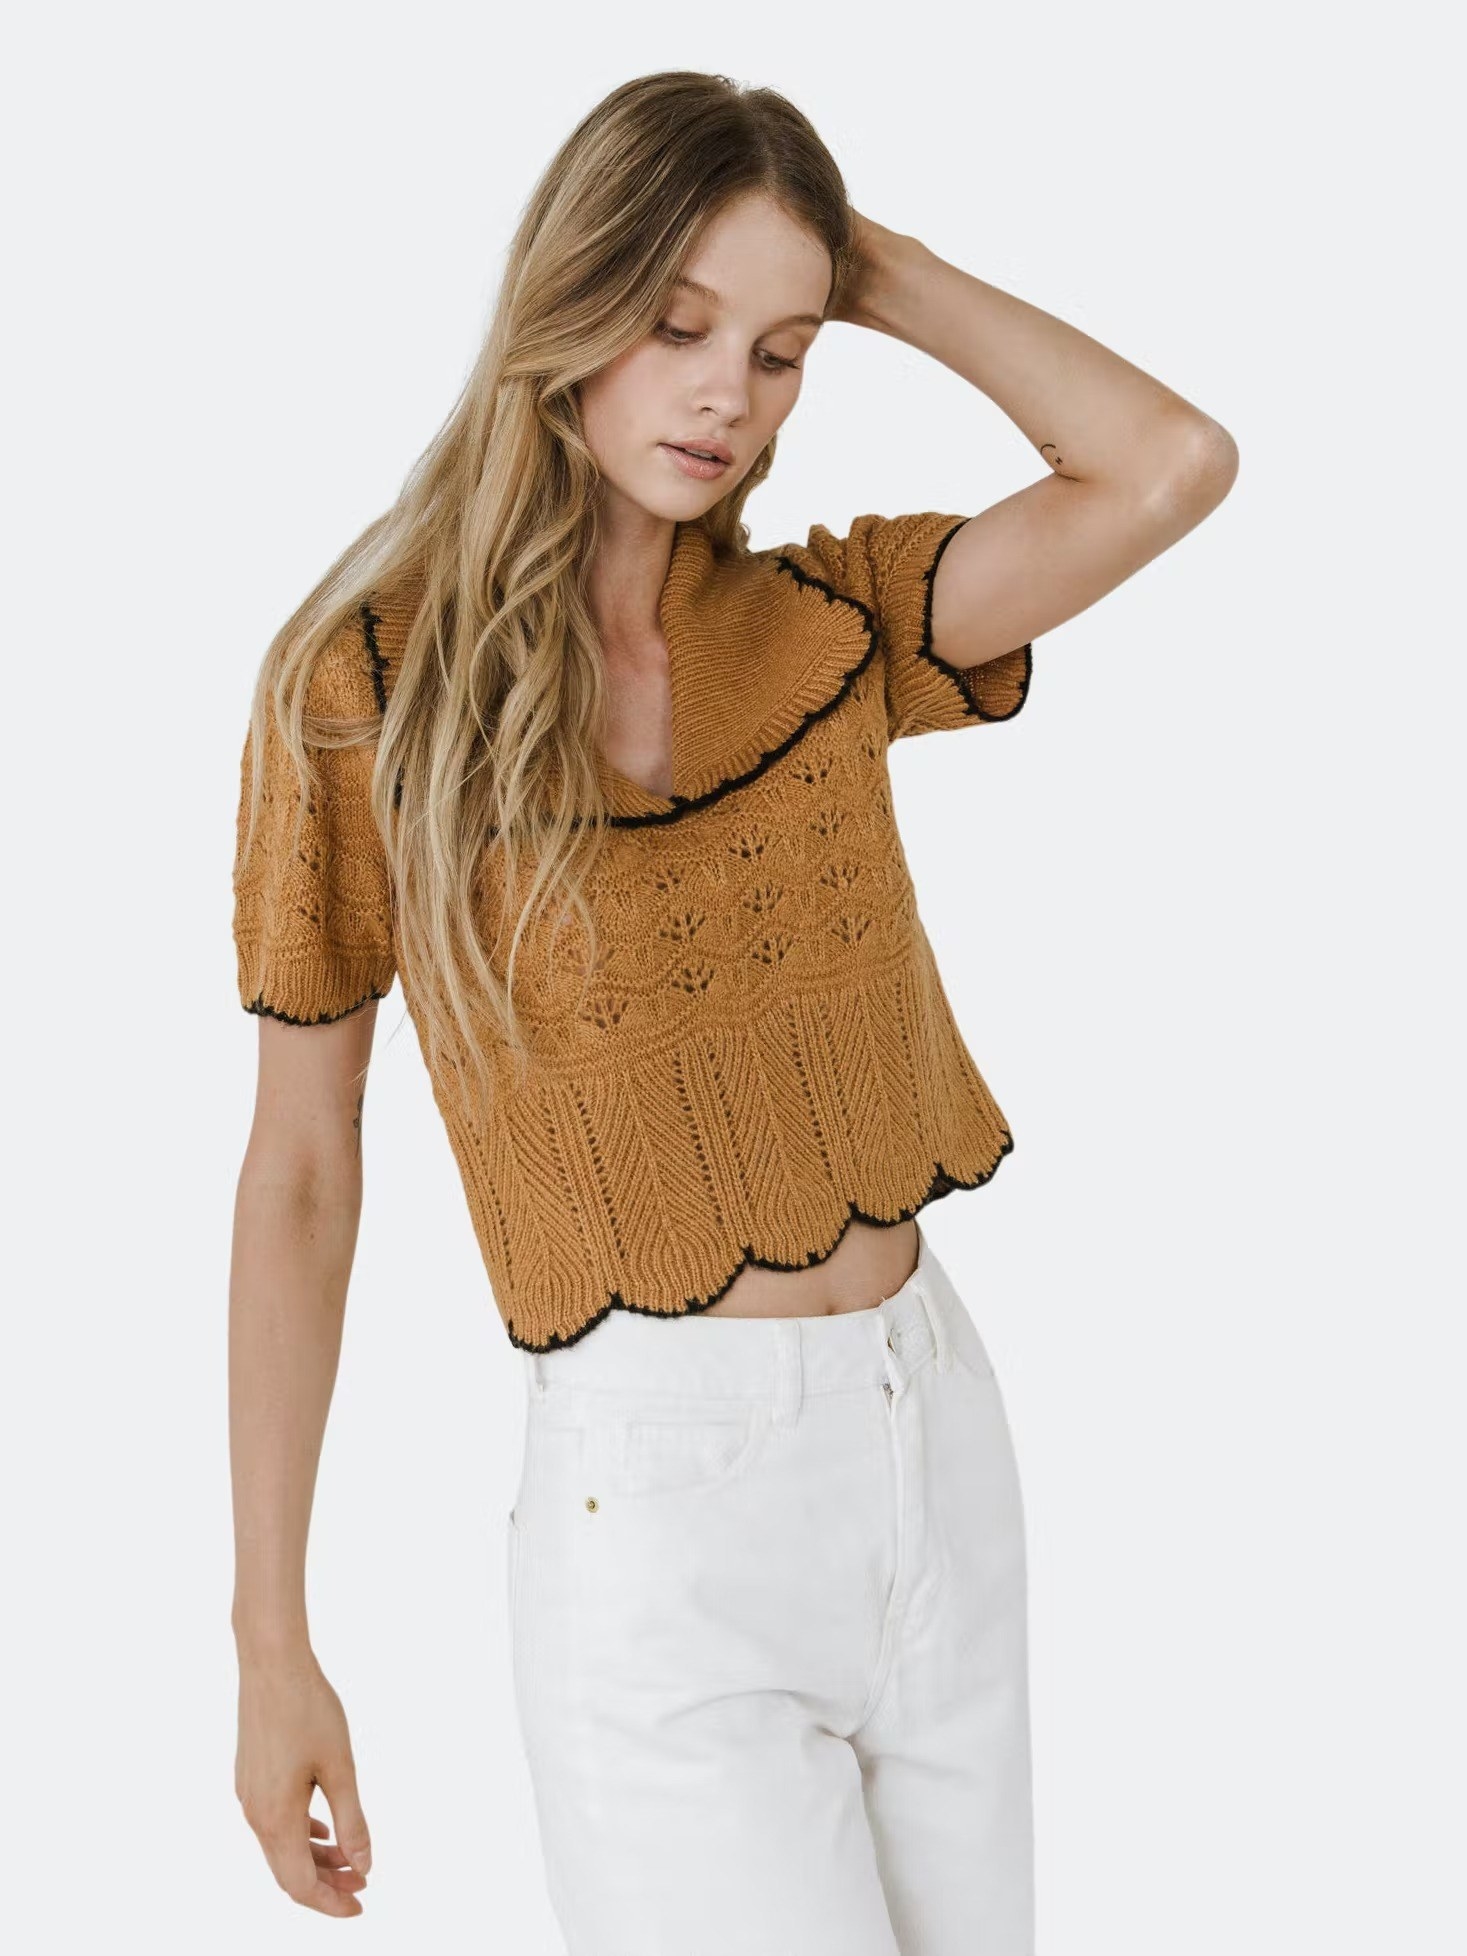 A model wearing the Short Puff Sleeve Scalloped Knit Top in camel